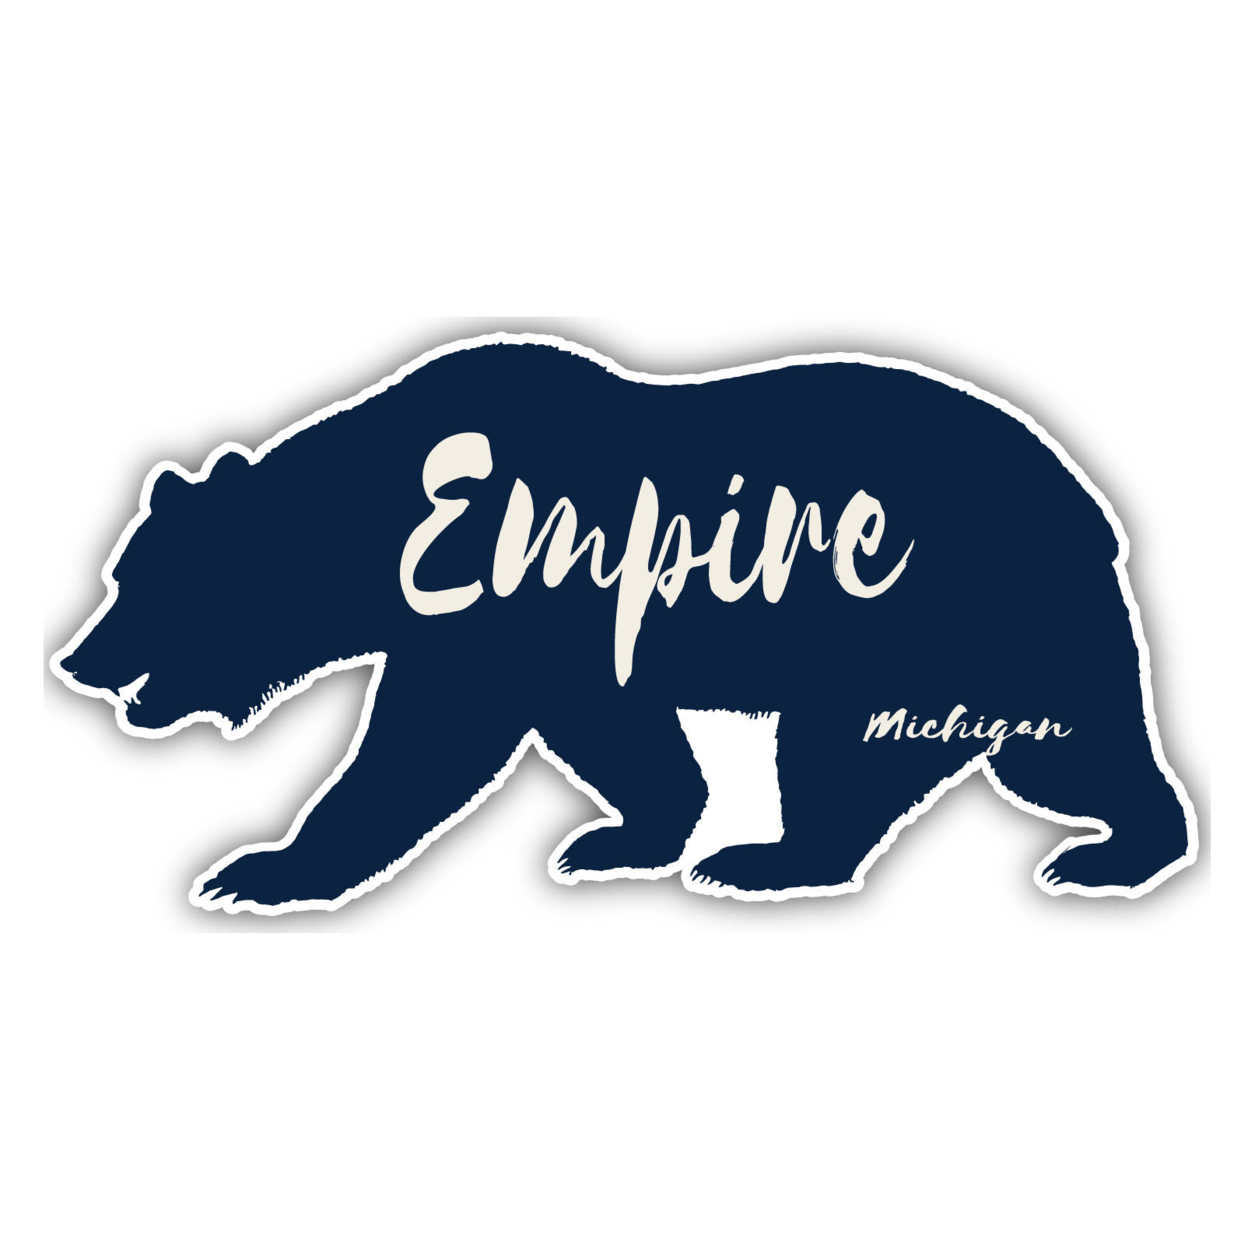 Empire Michigan Souvenir Decorative Stickers (Choose Theme And Size) - 4-Pack, 6-Inch, Bear